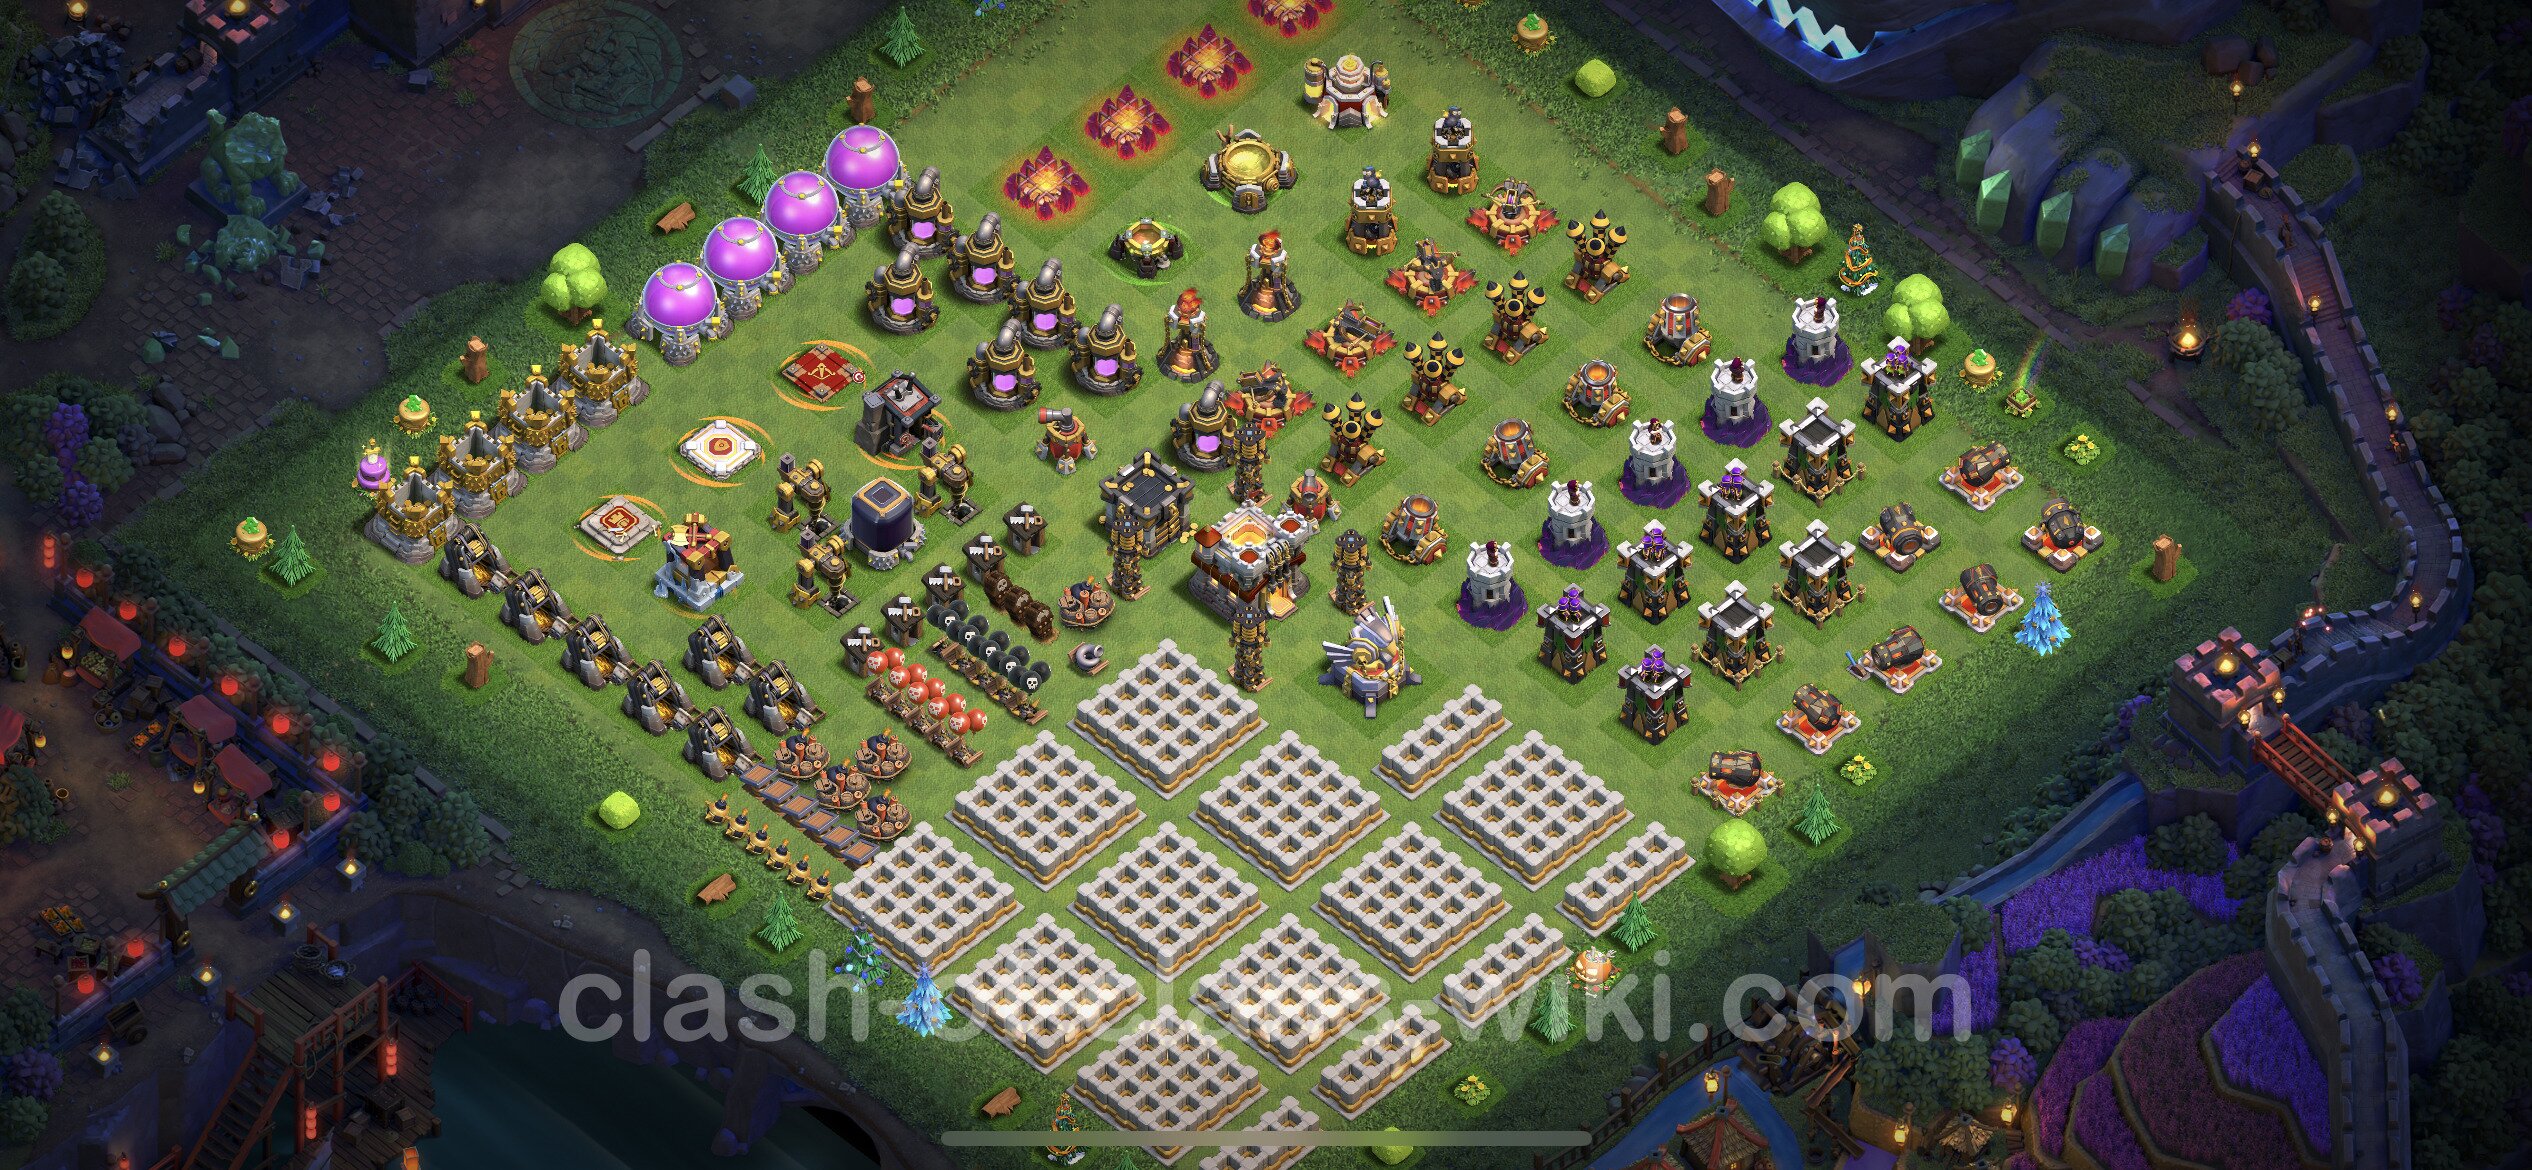 Funny Troll Base TH11 with Link - Town Hall Level 11 Art Base Copy, #19